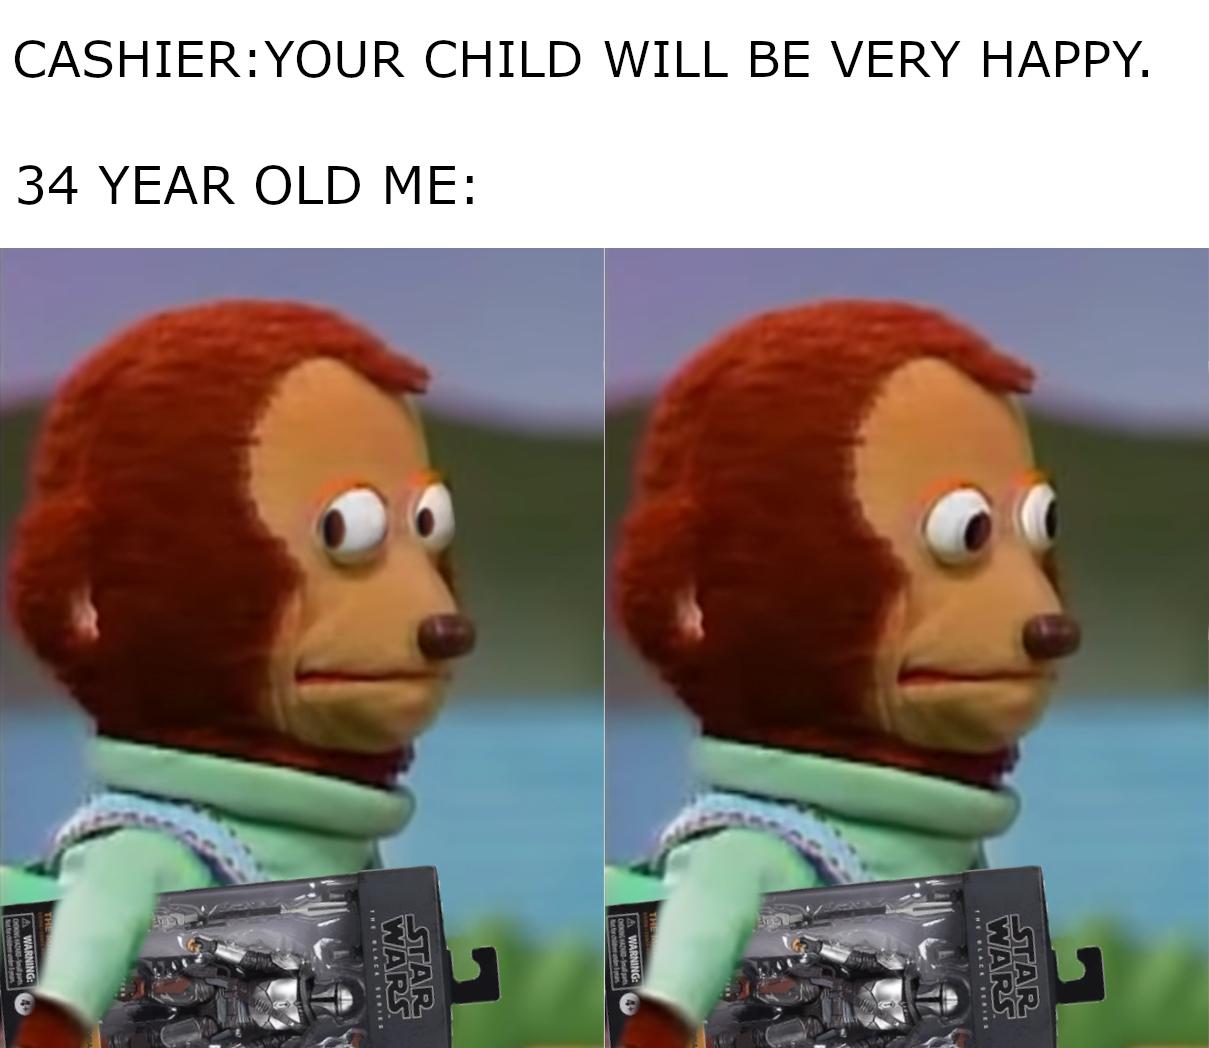 gaming dank memes - handmaid's tale meme - Cashier Your Child Will Be Very Happy. 34 Year Old Me Warning The Blace Serie Wars Star War... Star